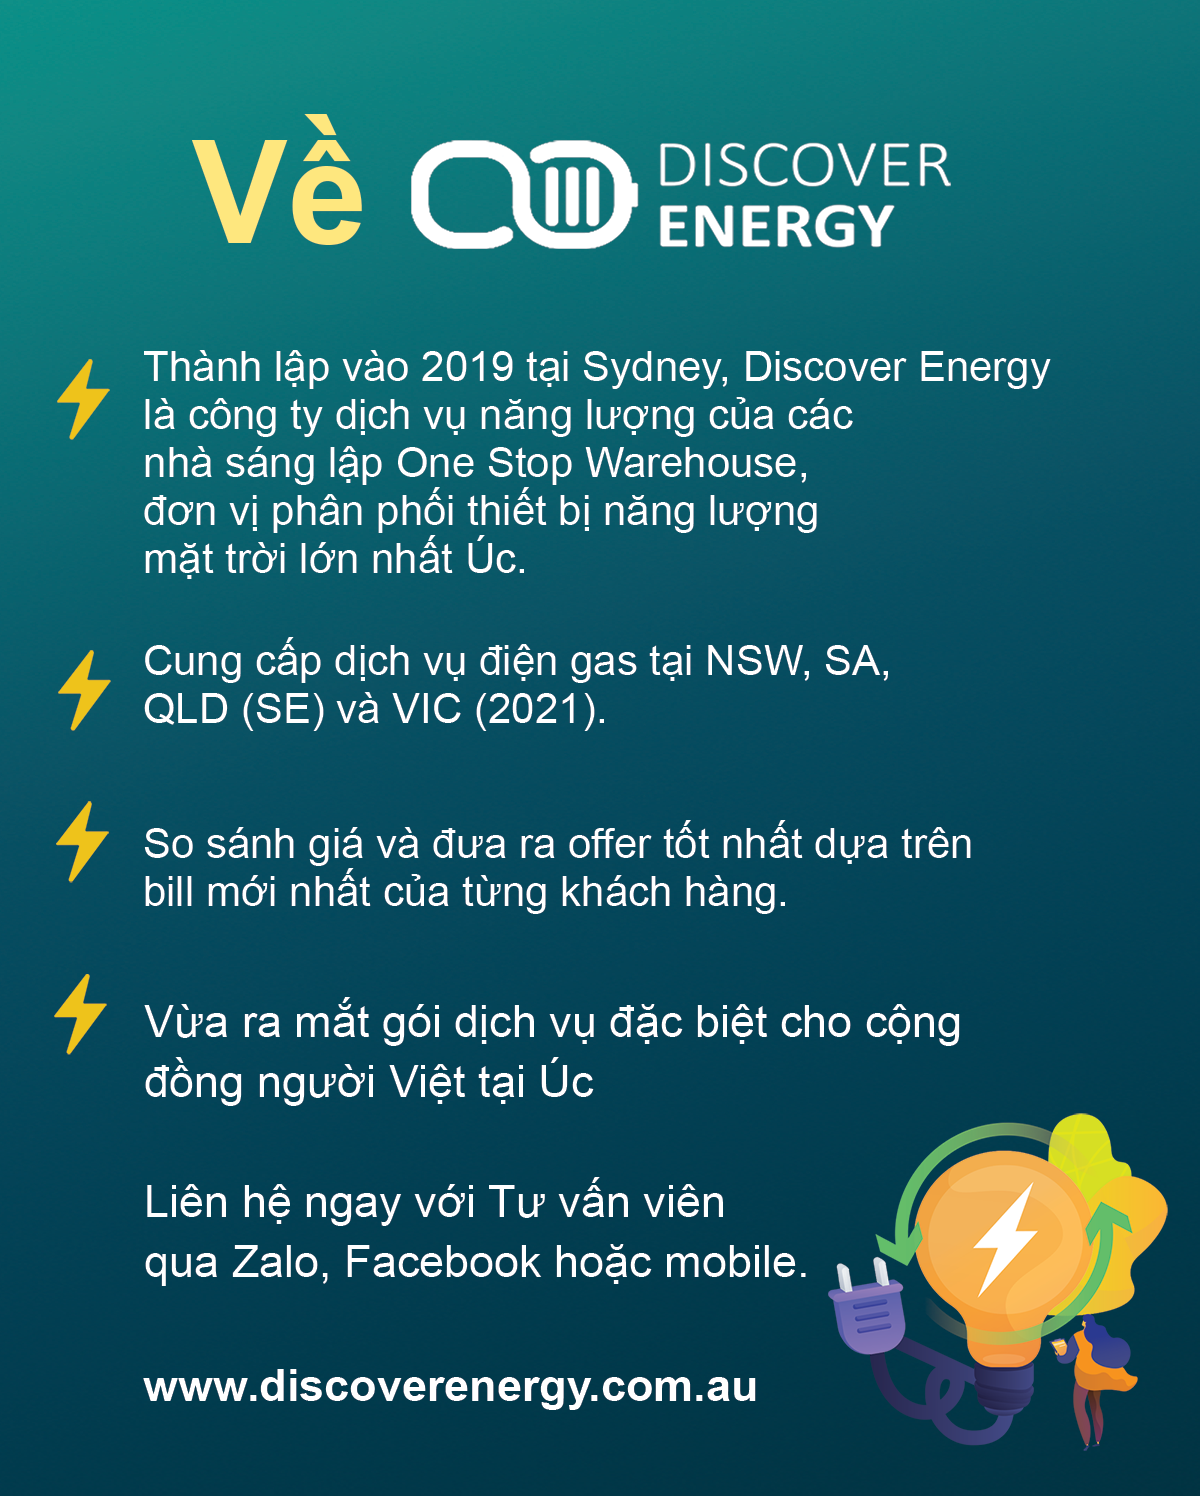 2 – About Discover Energy Vietnamese